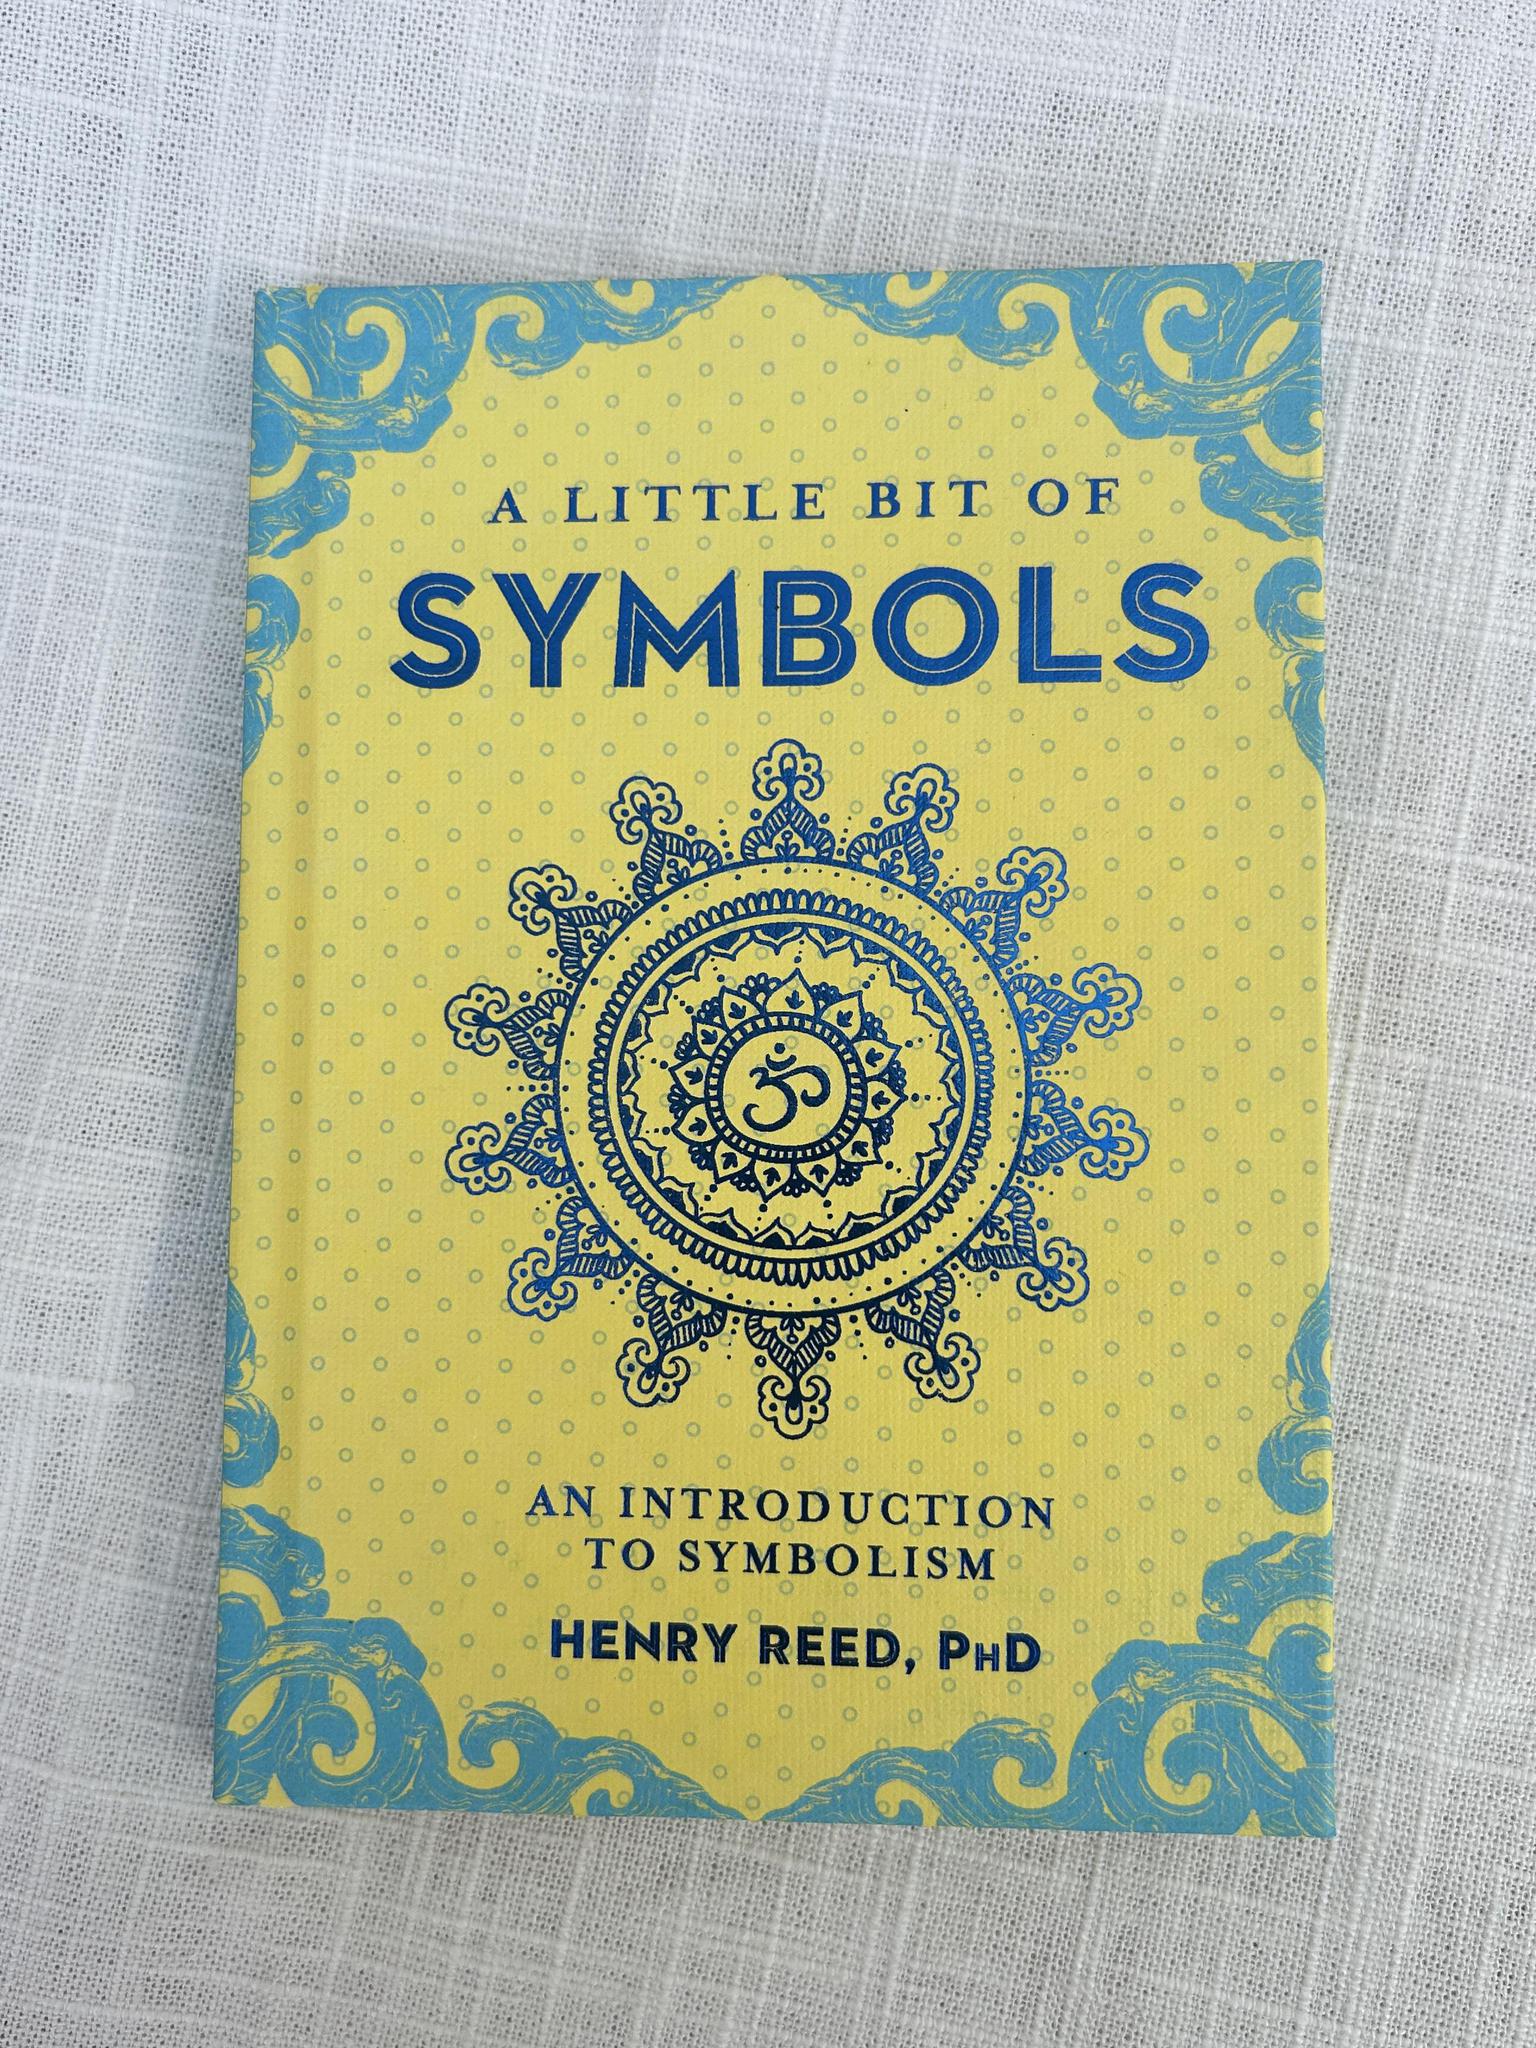 A Little Bit of Symbols book: an introduction to symbolism